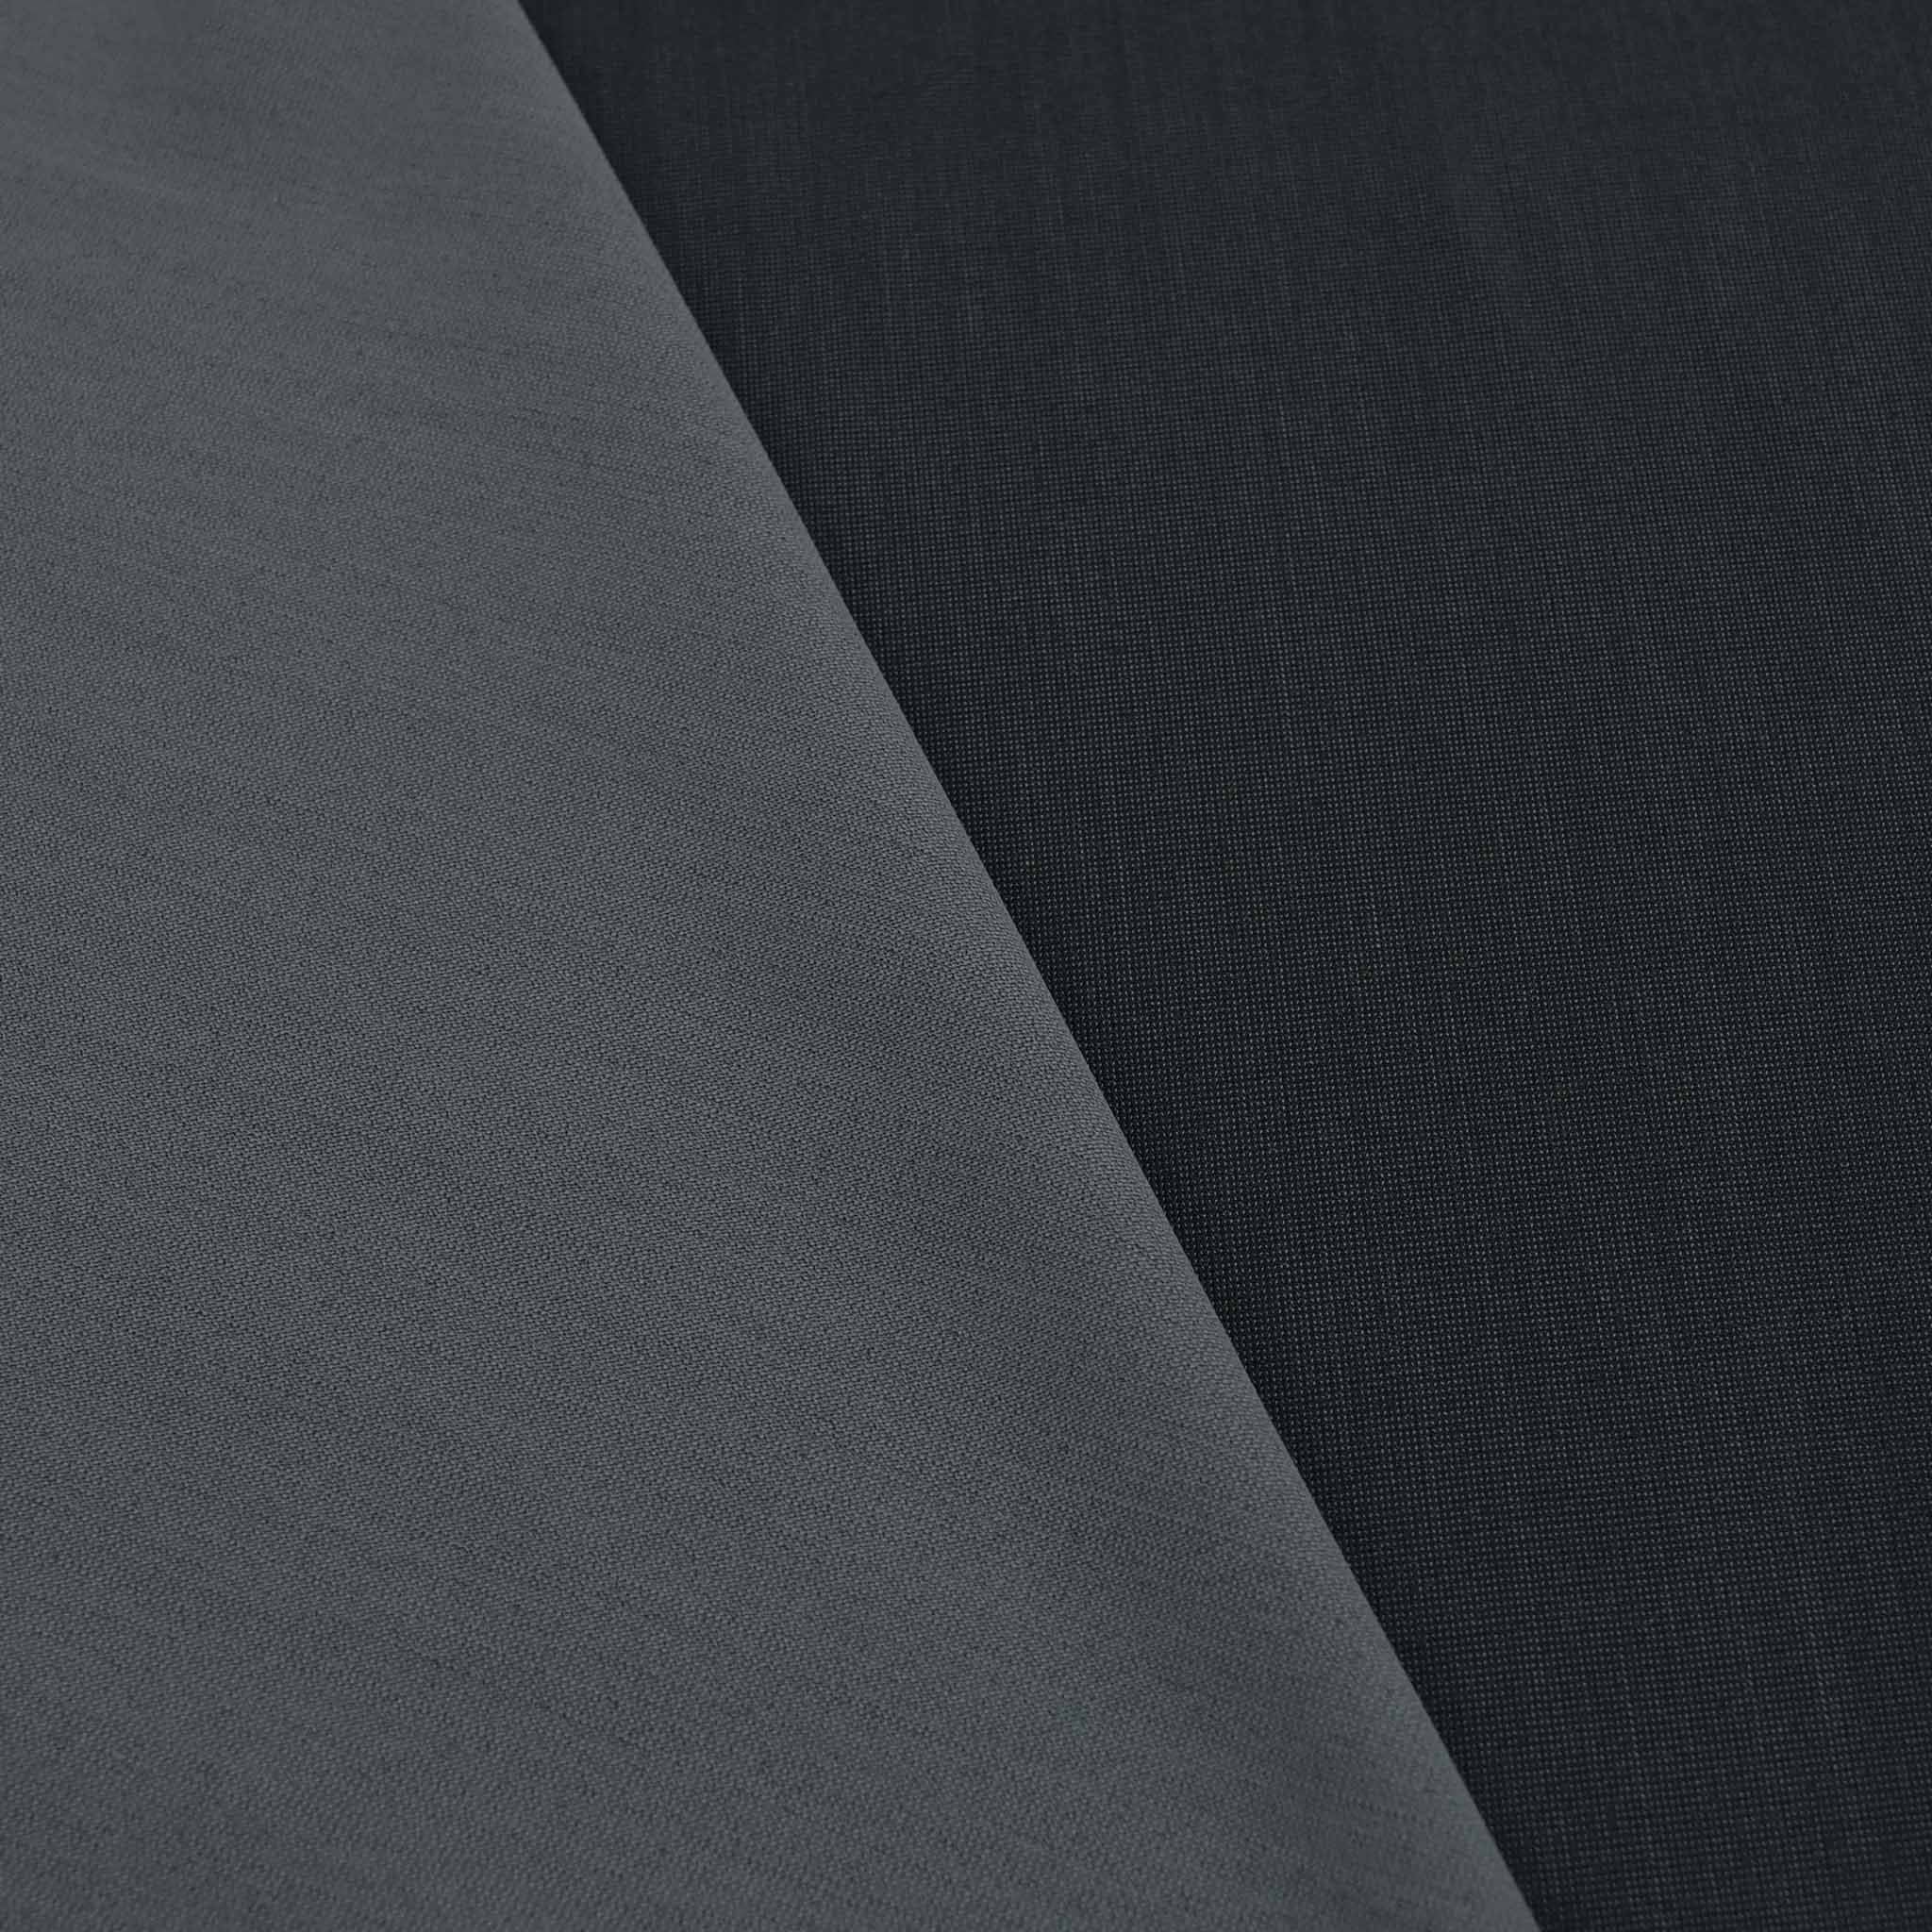 Charcoal Suiting Fabric 98153